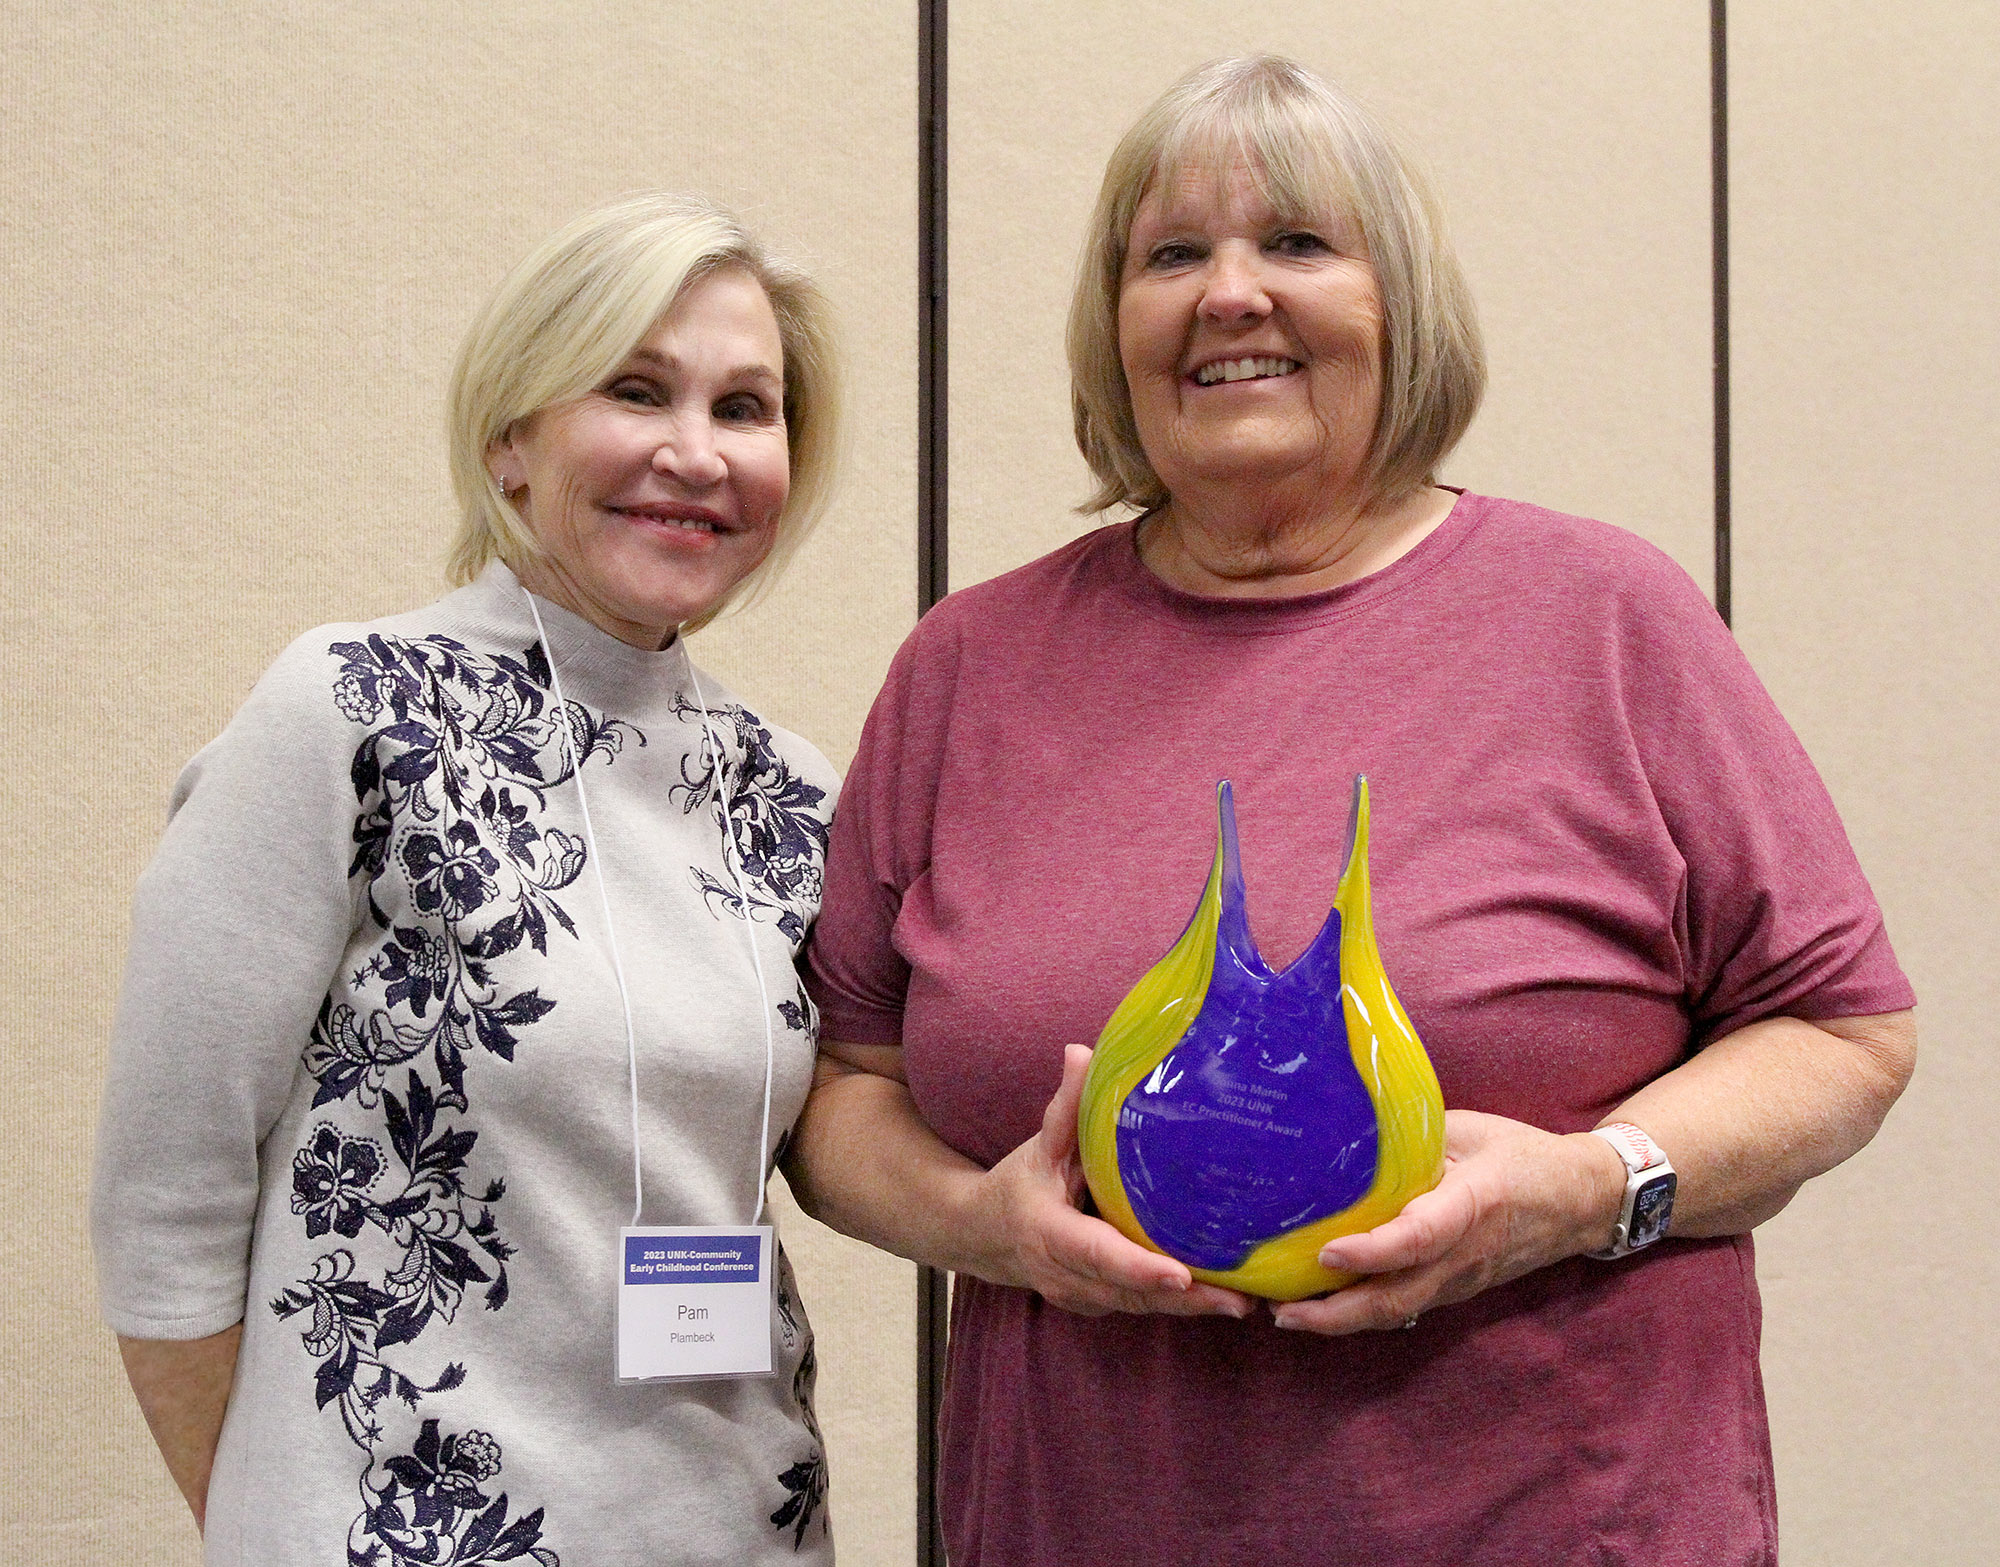 Donna Martin, a Montessori teacher from Omaha, right, was recognized with the Early Childhood Practitioner Award during Friday’s UNK-Community Early Childhood Conference. She’s pictured with Pam Plambeck, daughter of the late LaVonne Plambeck.